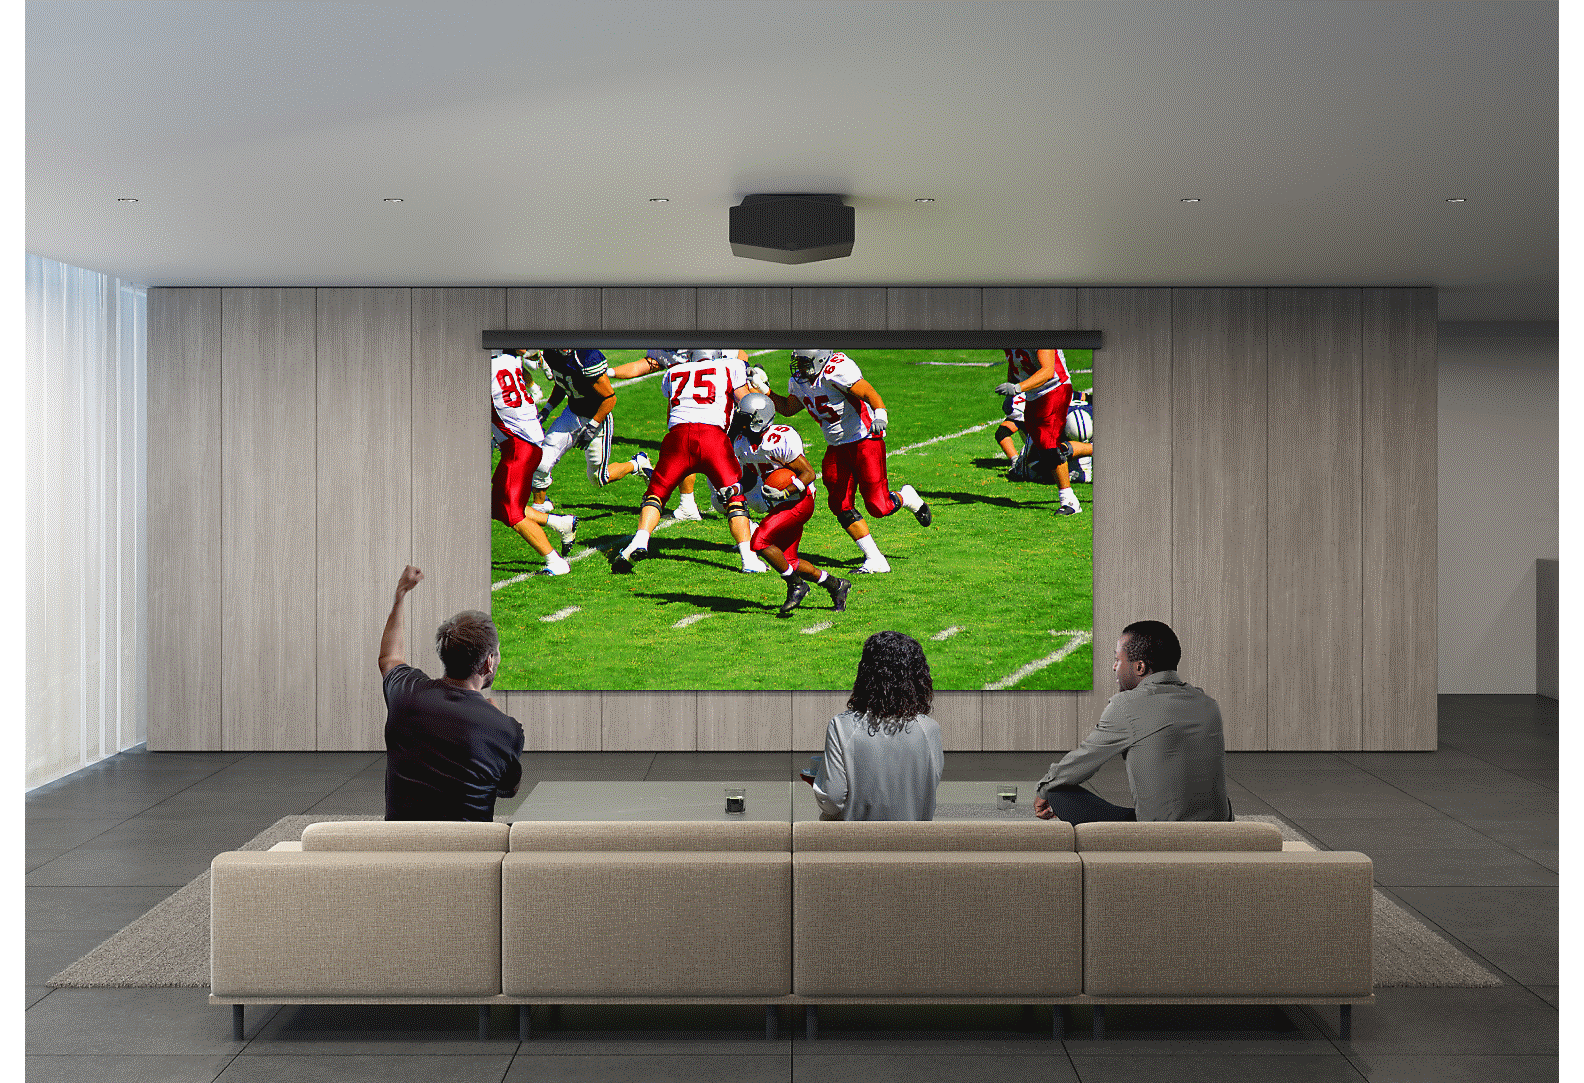 Two men and a woman watching American football game, using a projector and a big screen on the wall.